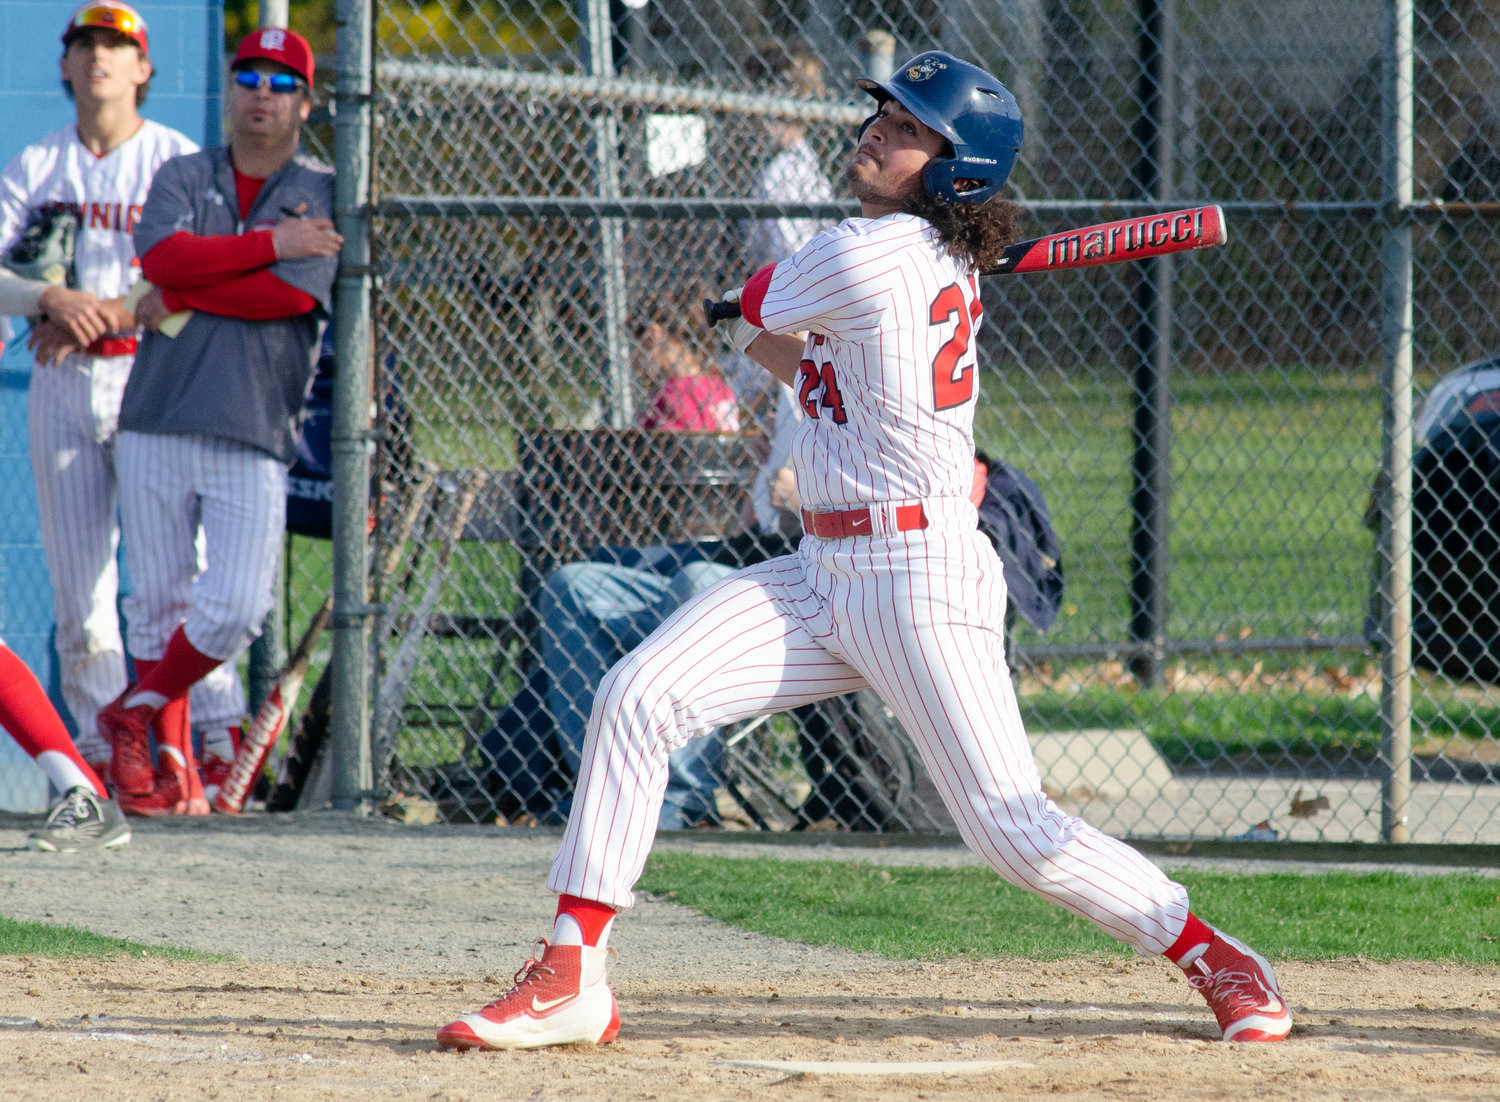 Elijah Barber watches his hit during the Townies game at Barrington on Wednesday, April 13.